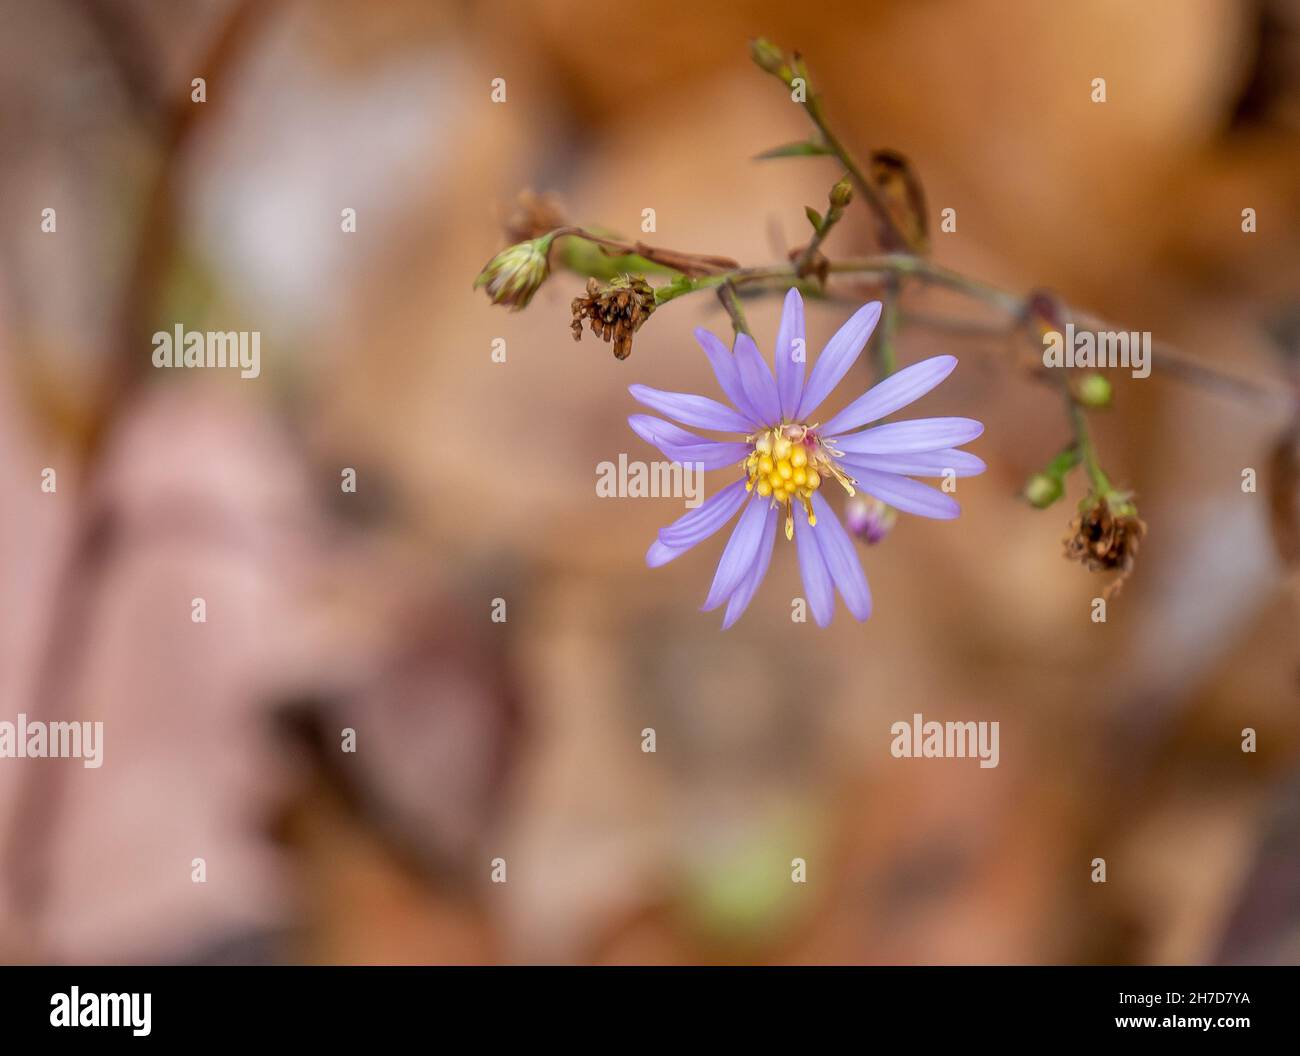 Close-up of a smooth blue aster flower that is still blooming on a cold November morning with blurred autumn leaves in the background. Stock Photo